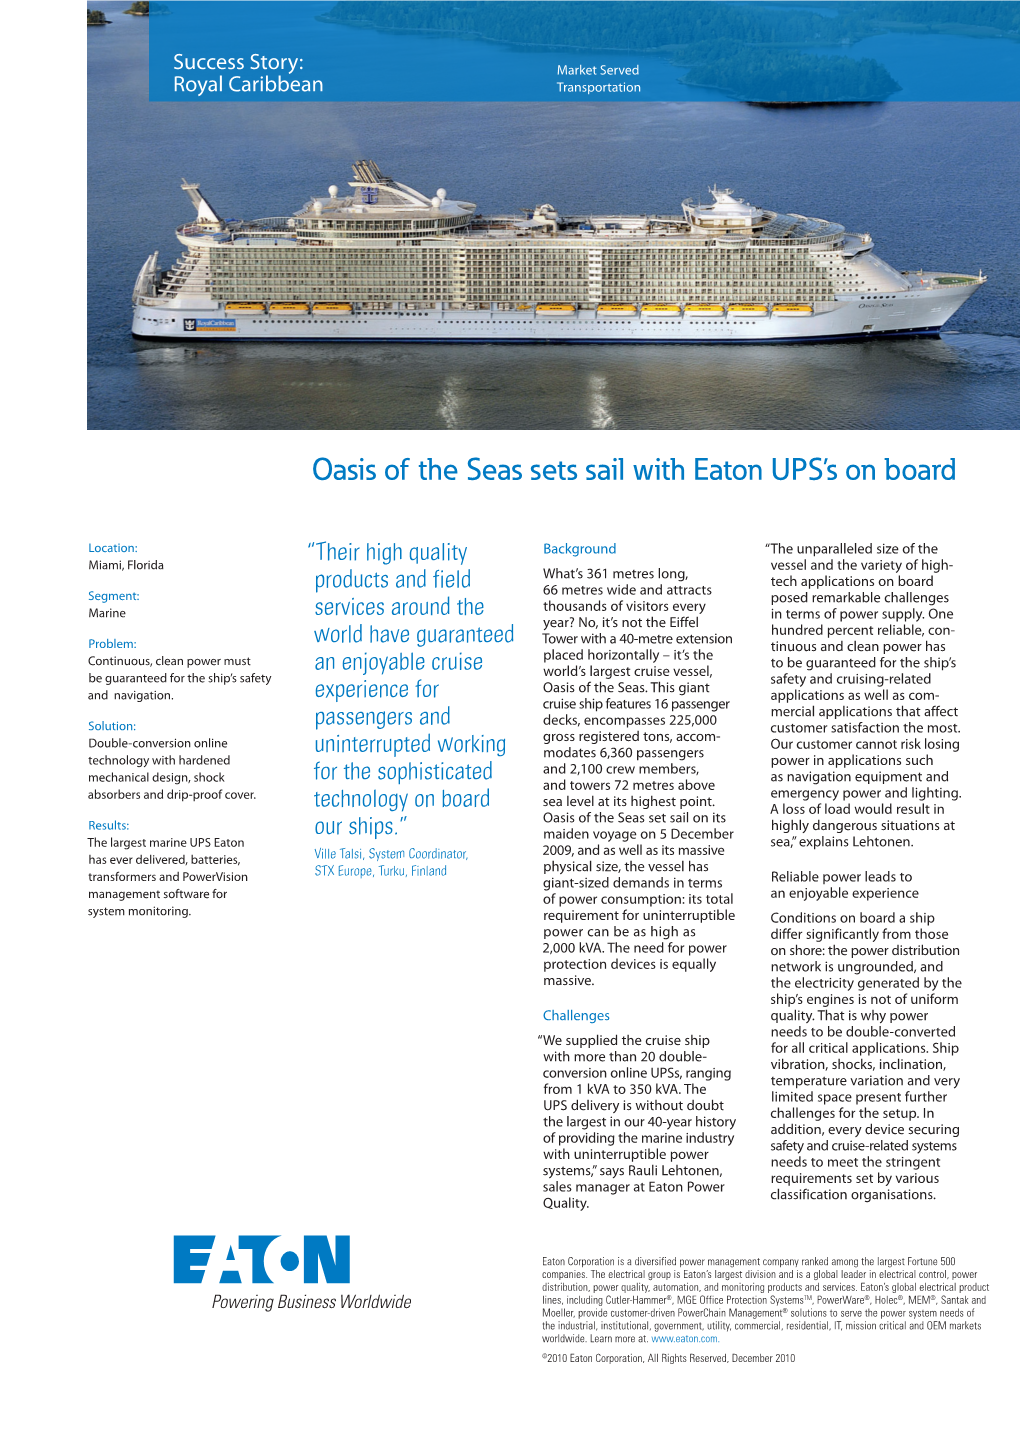 Oasis of the Seas Sets Sail with Eaton UPS's on Board